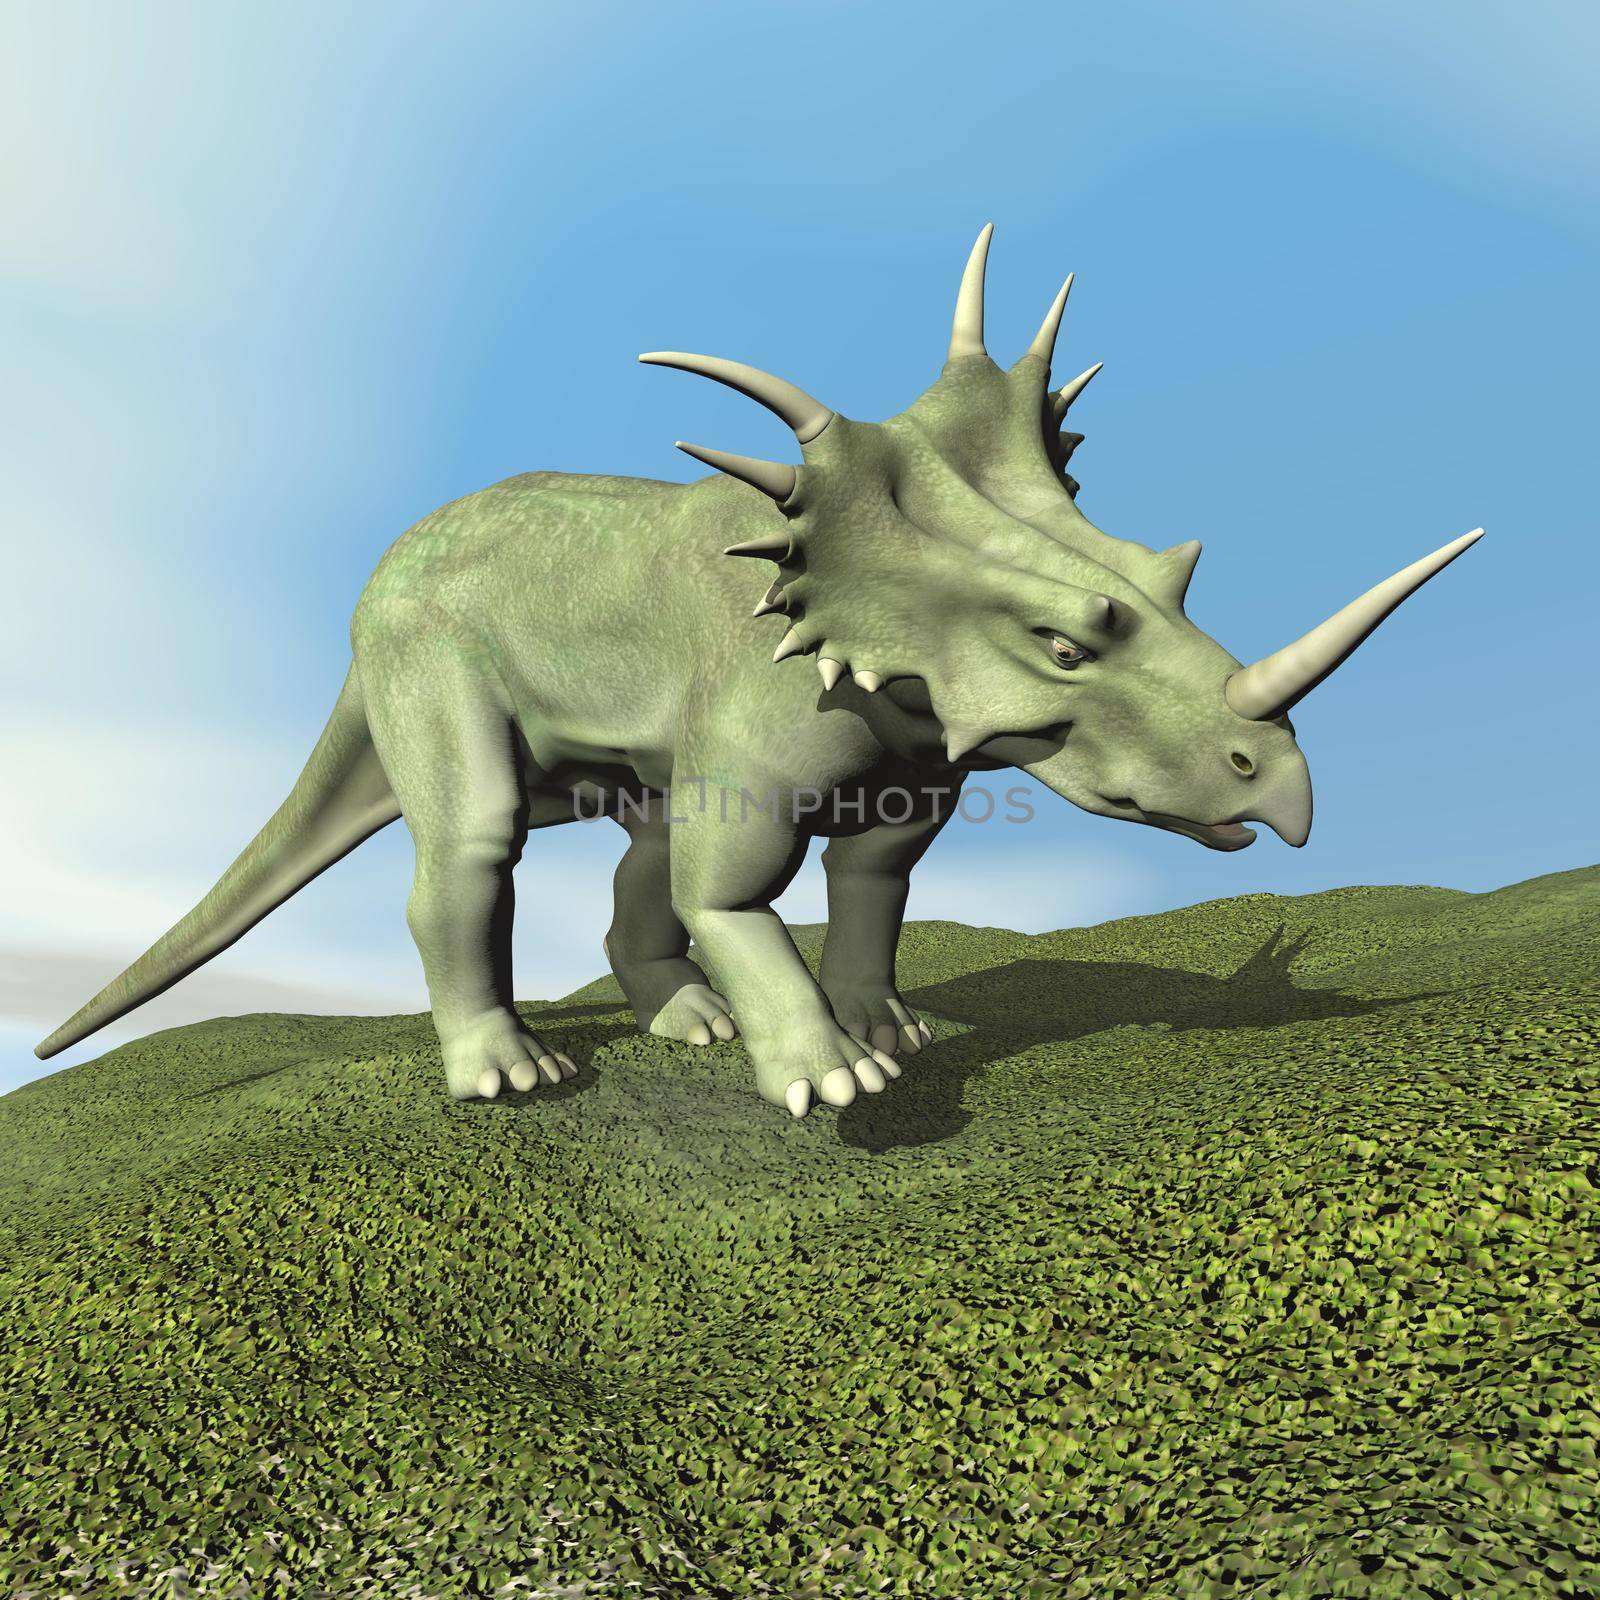 Styracosaurus dinosaur walking on the grass by day - 3D render